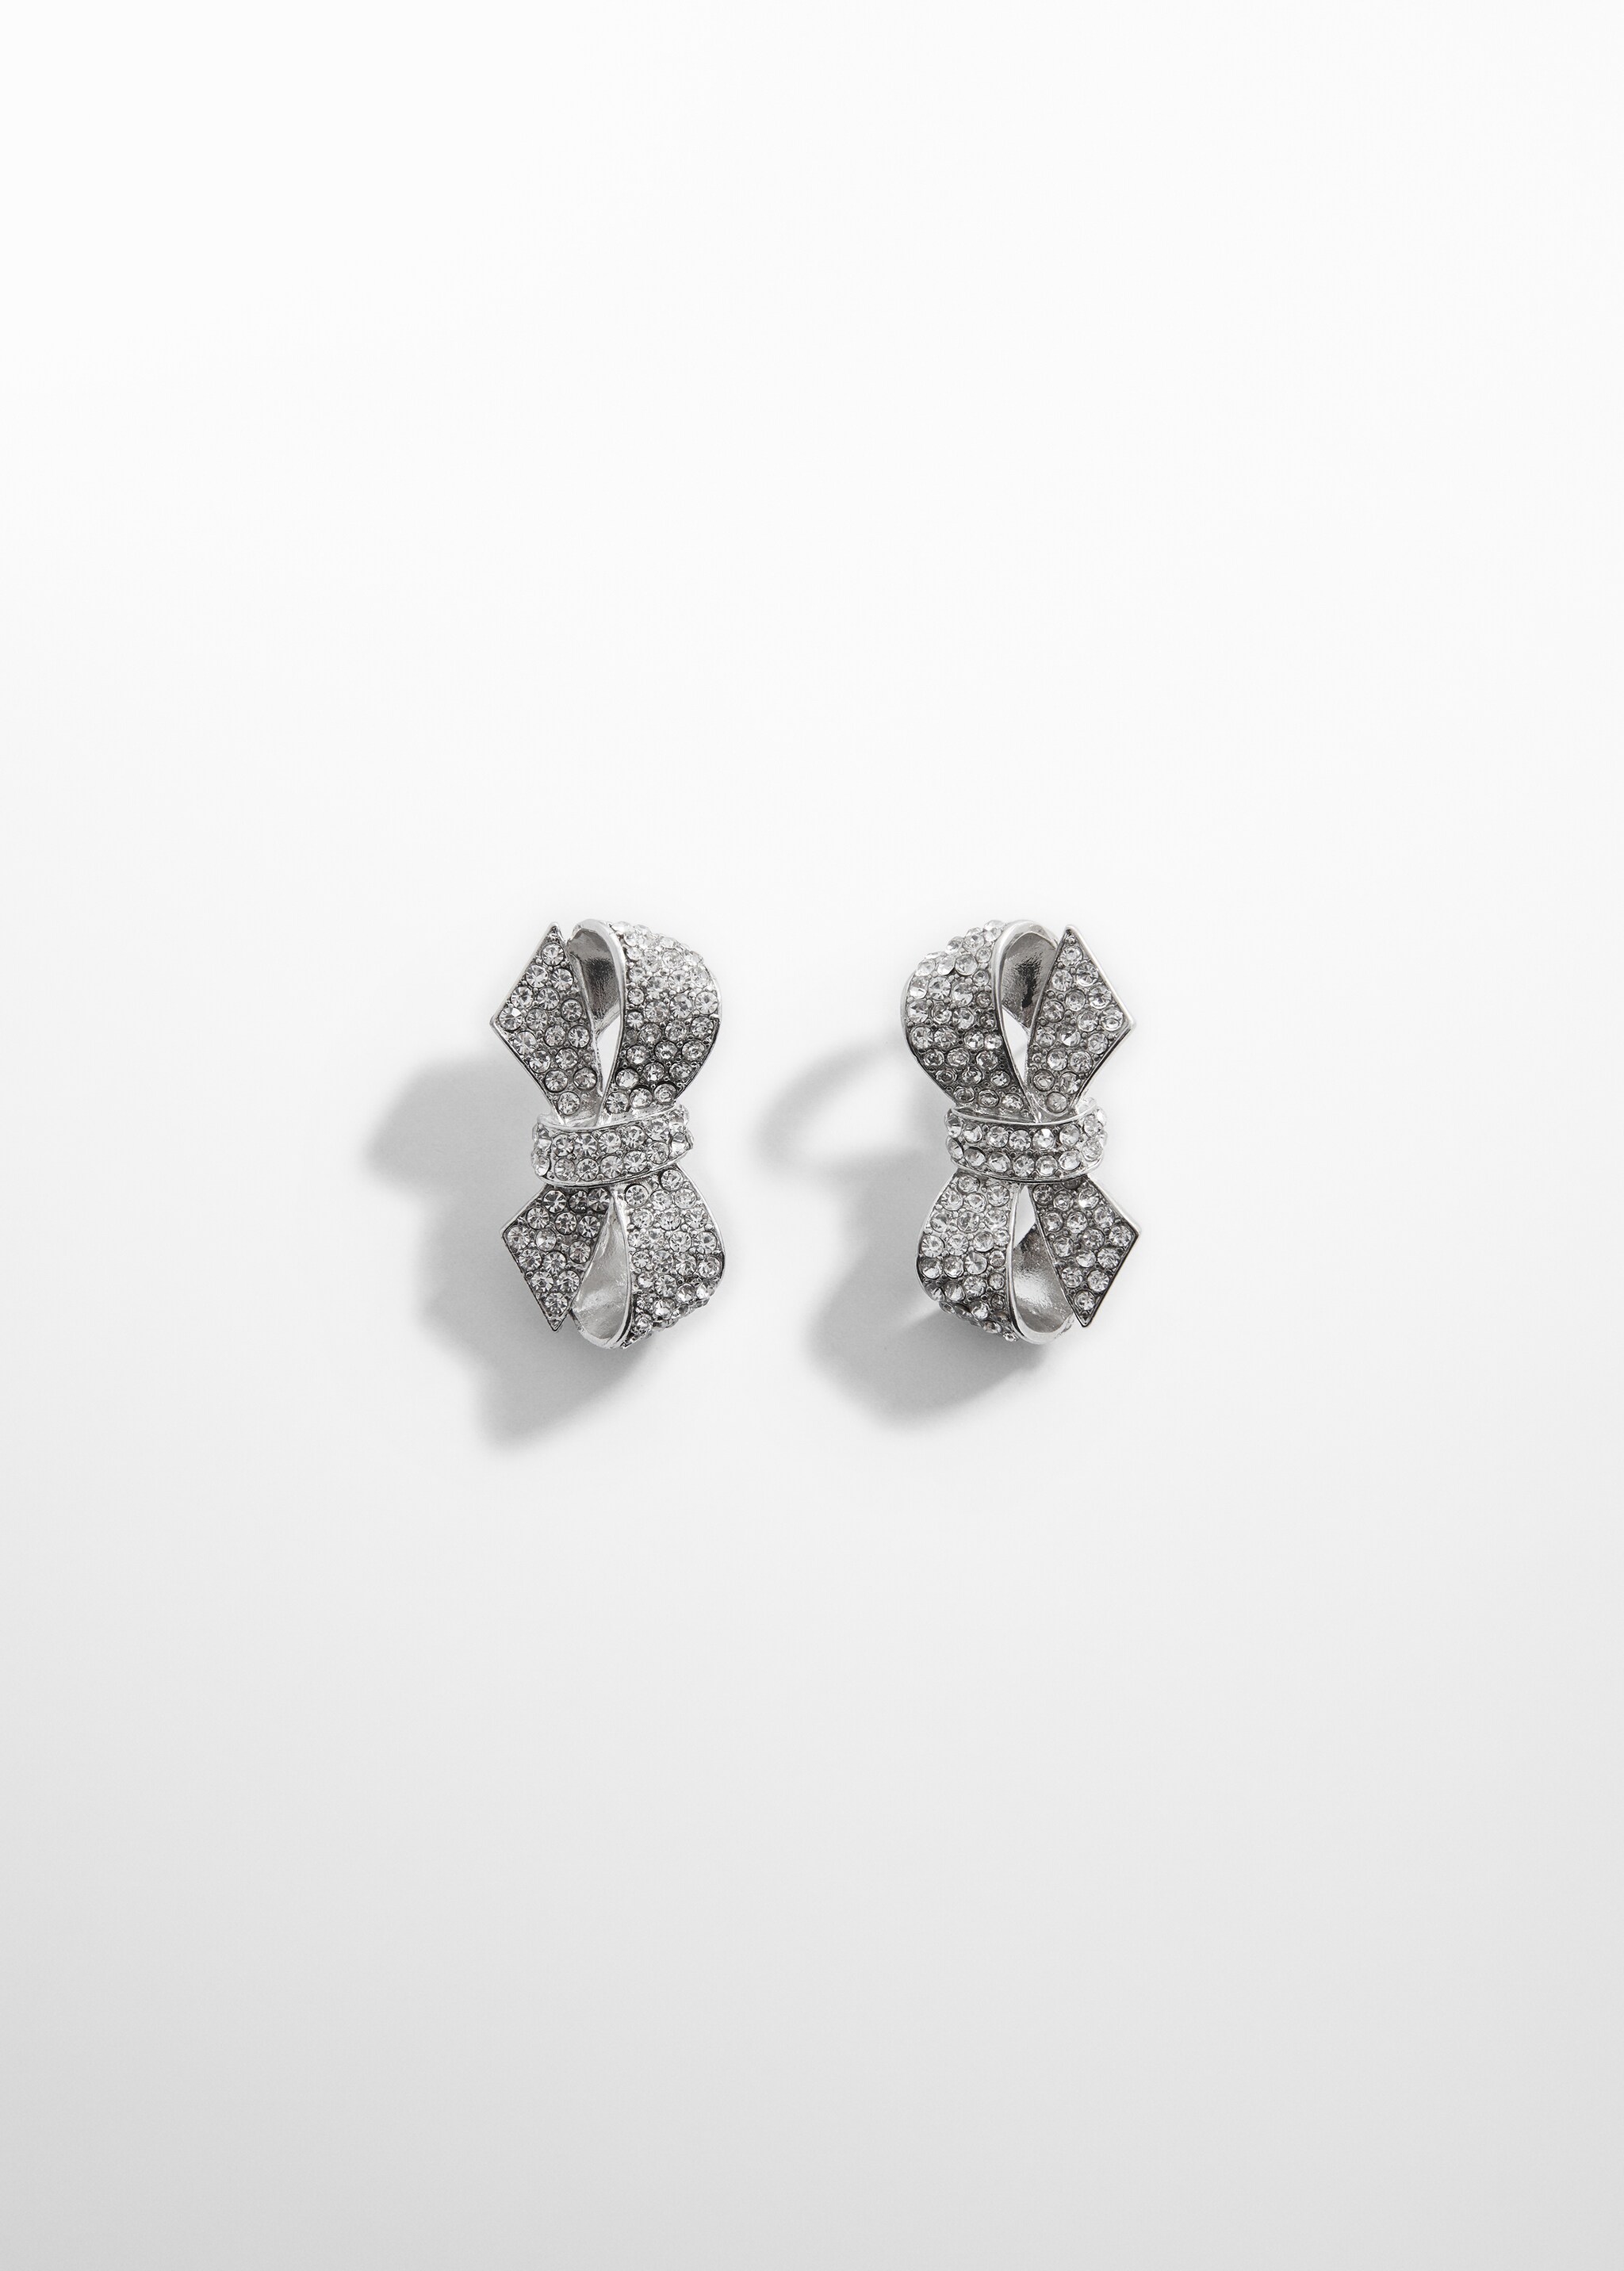 Rhinestone bow earrings - Article without model